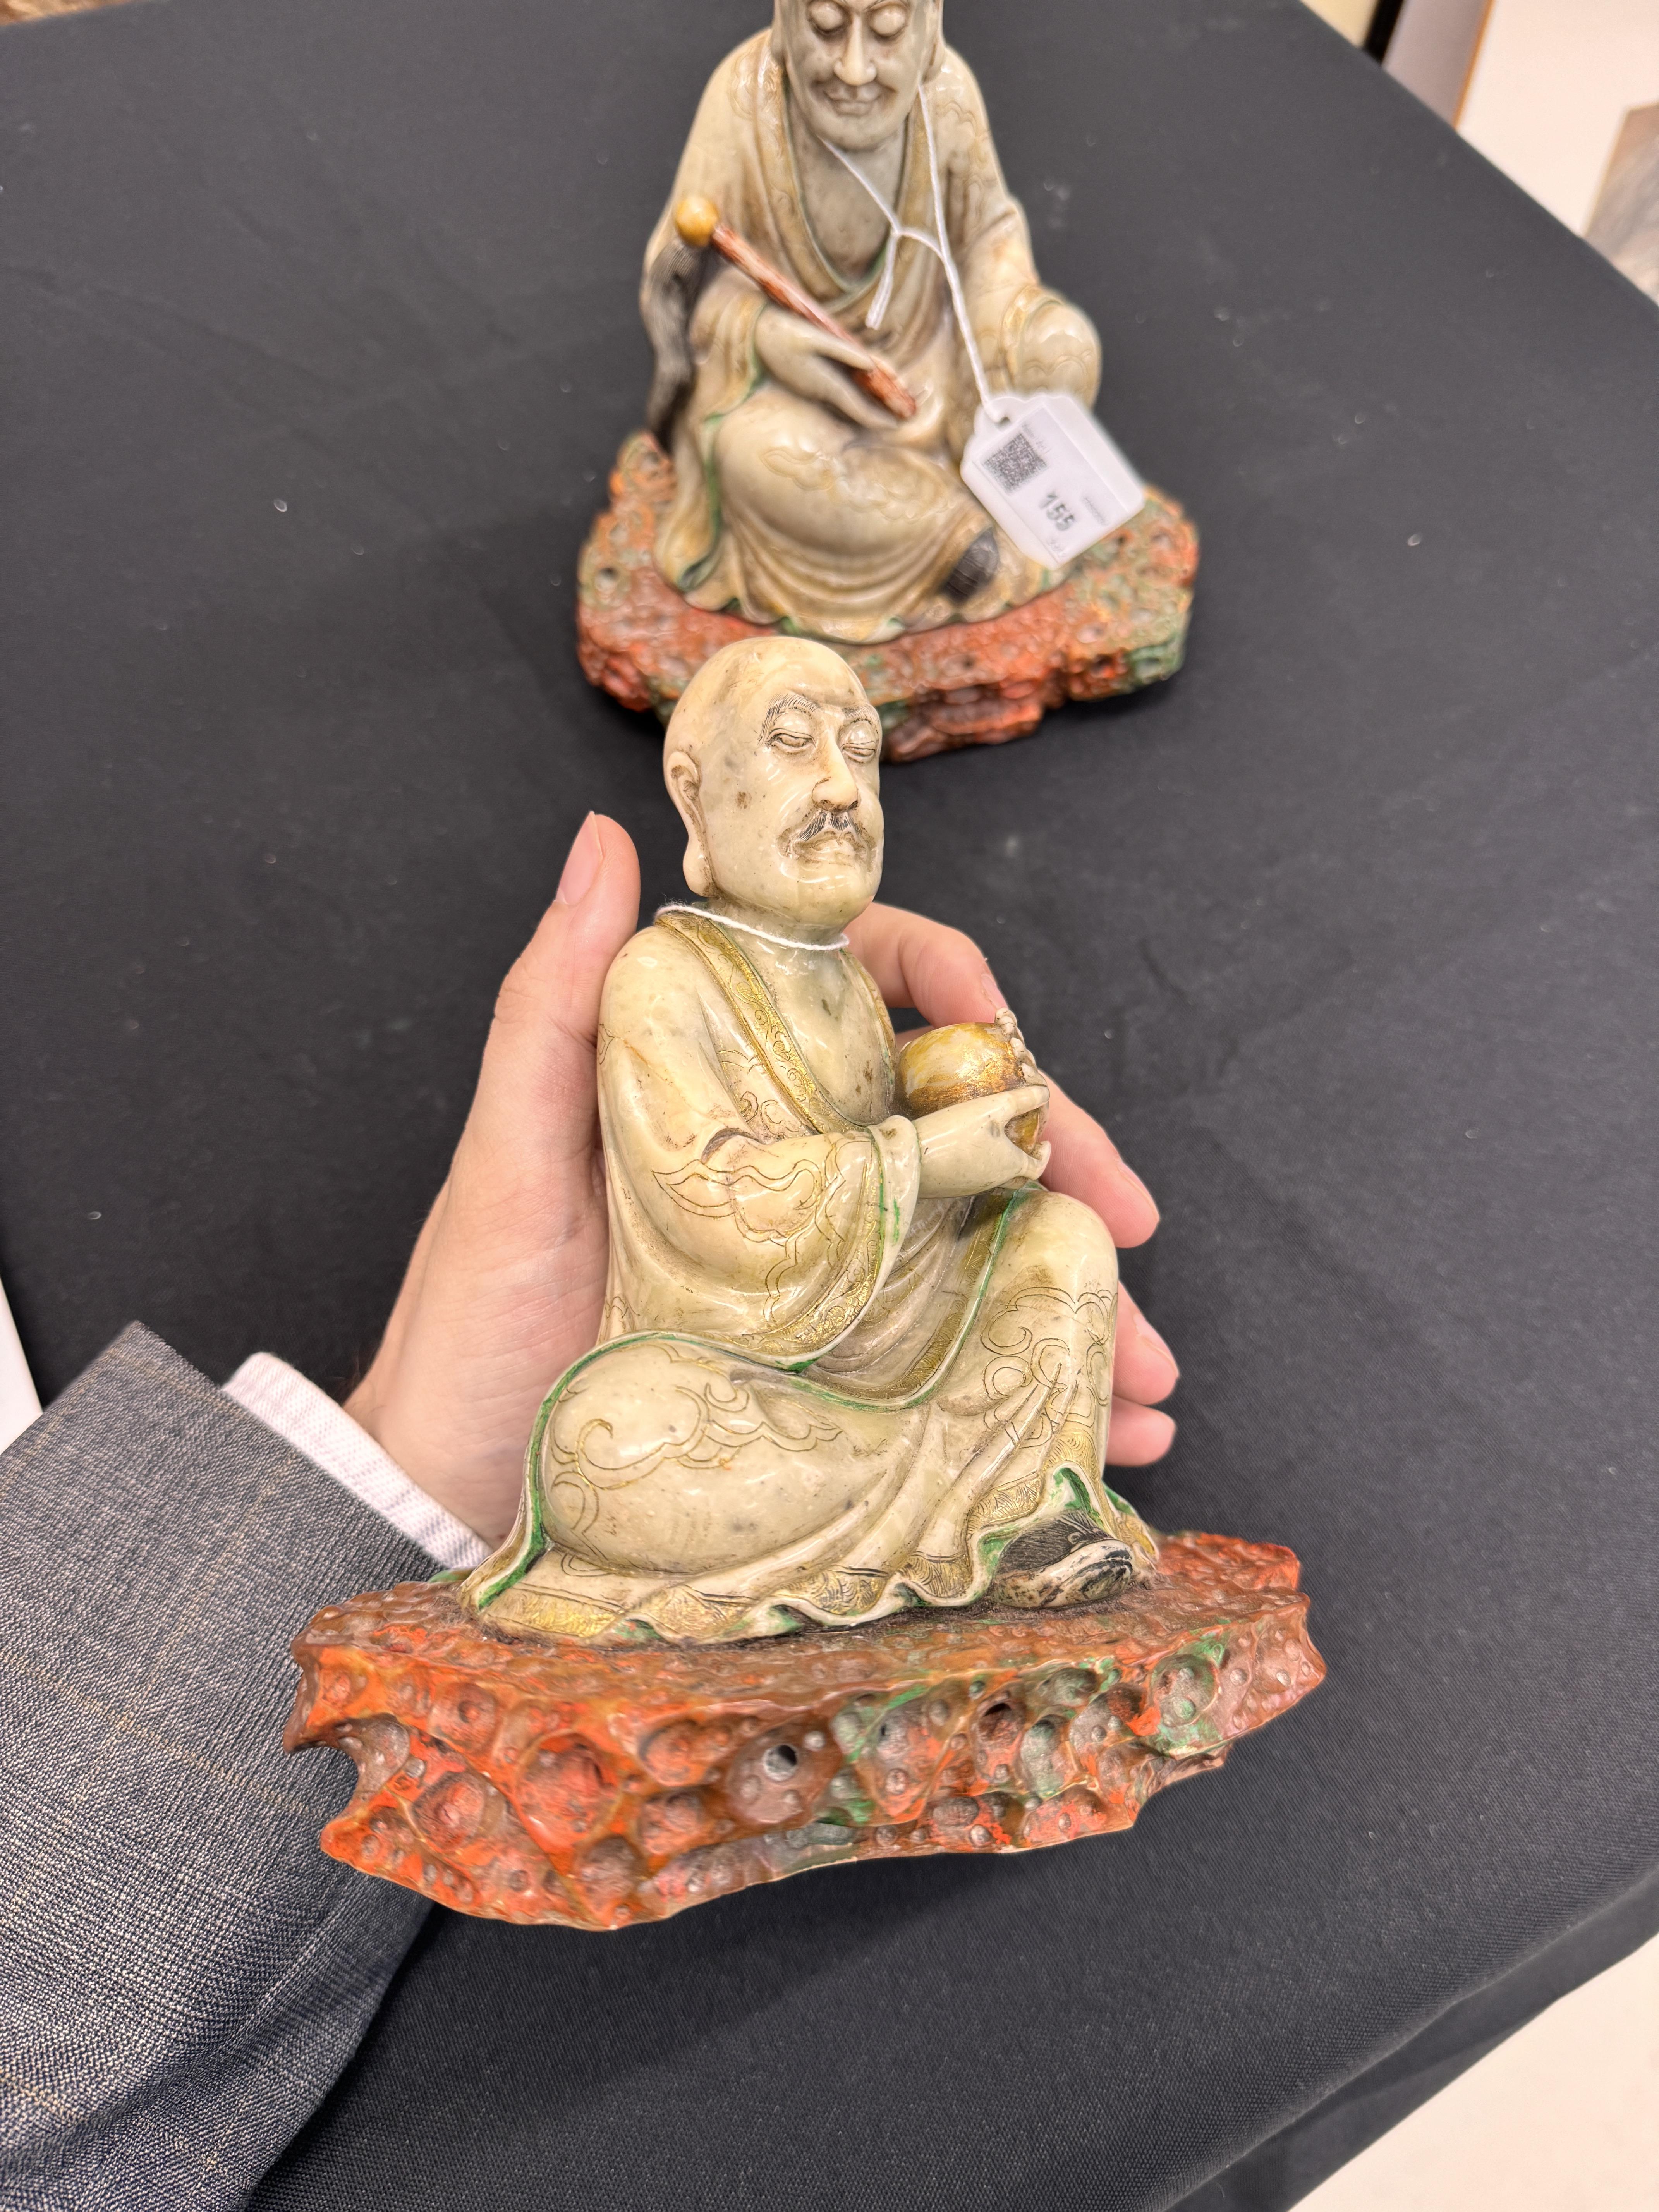 A PAIR OF FINE CHINESE SOAPSTONE 'LUOHAN' FIGURES 清康熙 壽山石羅漢坐像一對 - Image 17 of 24